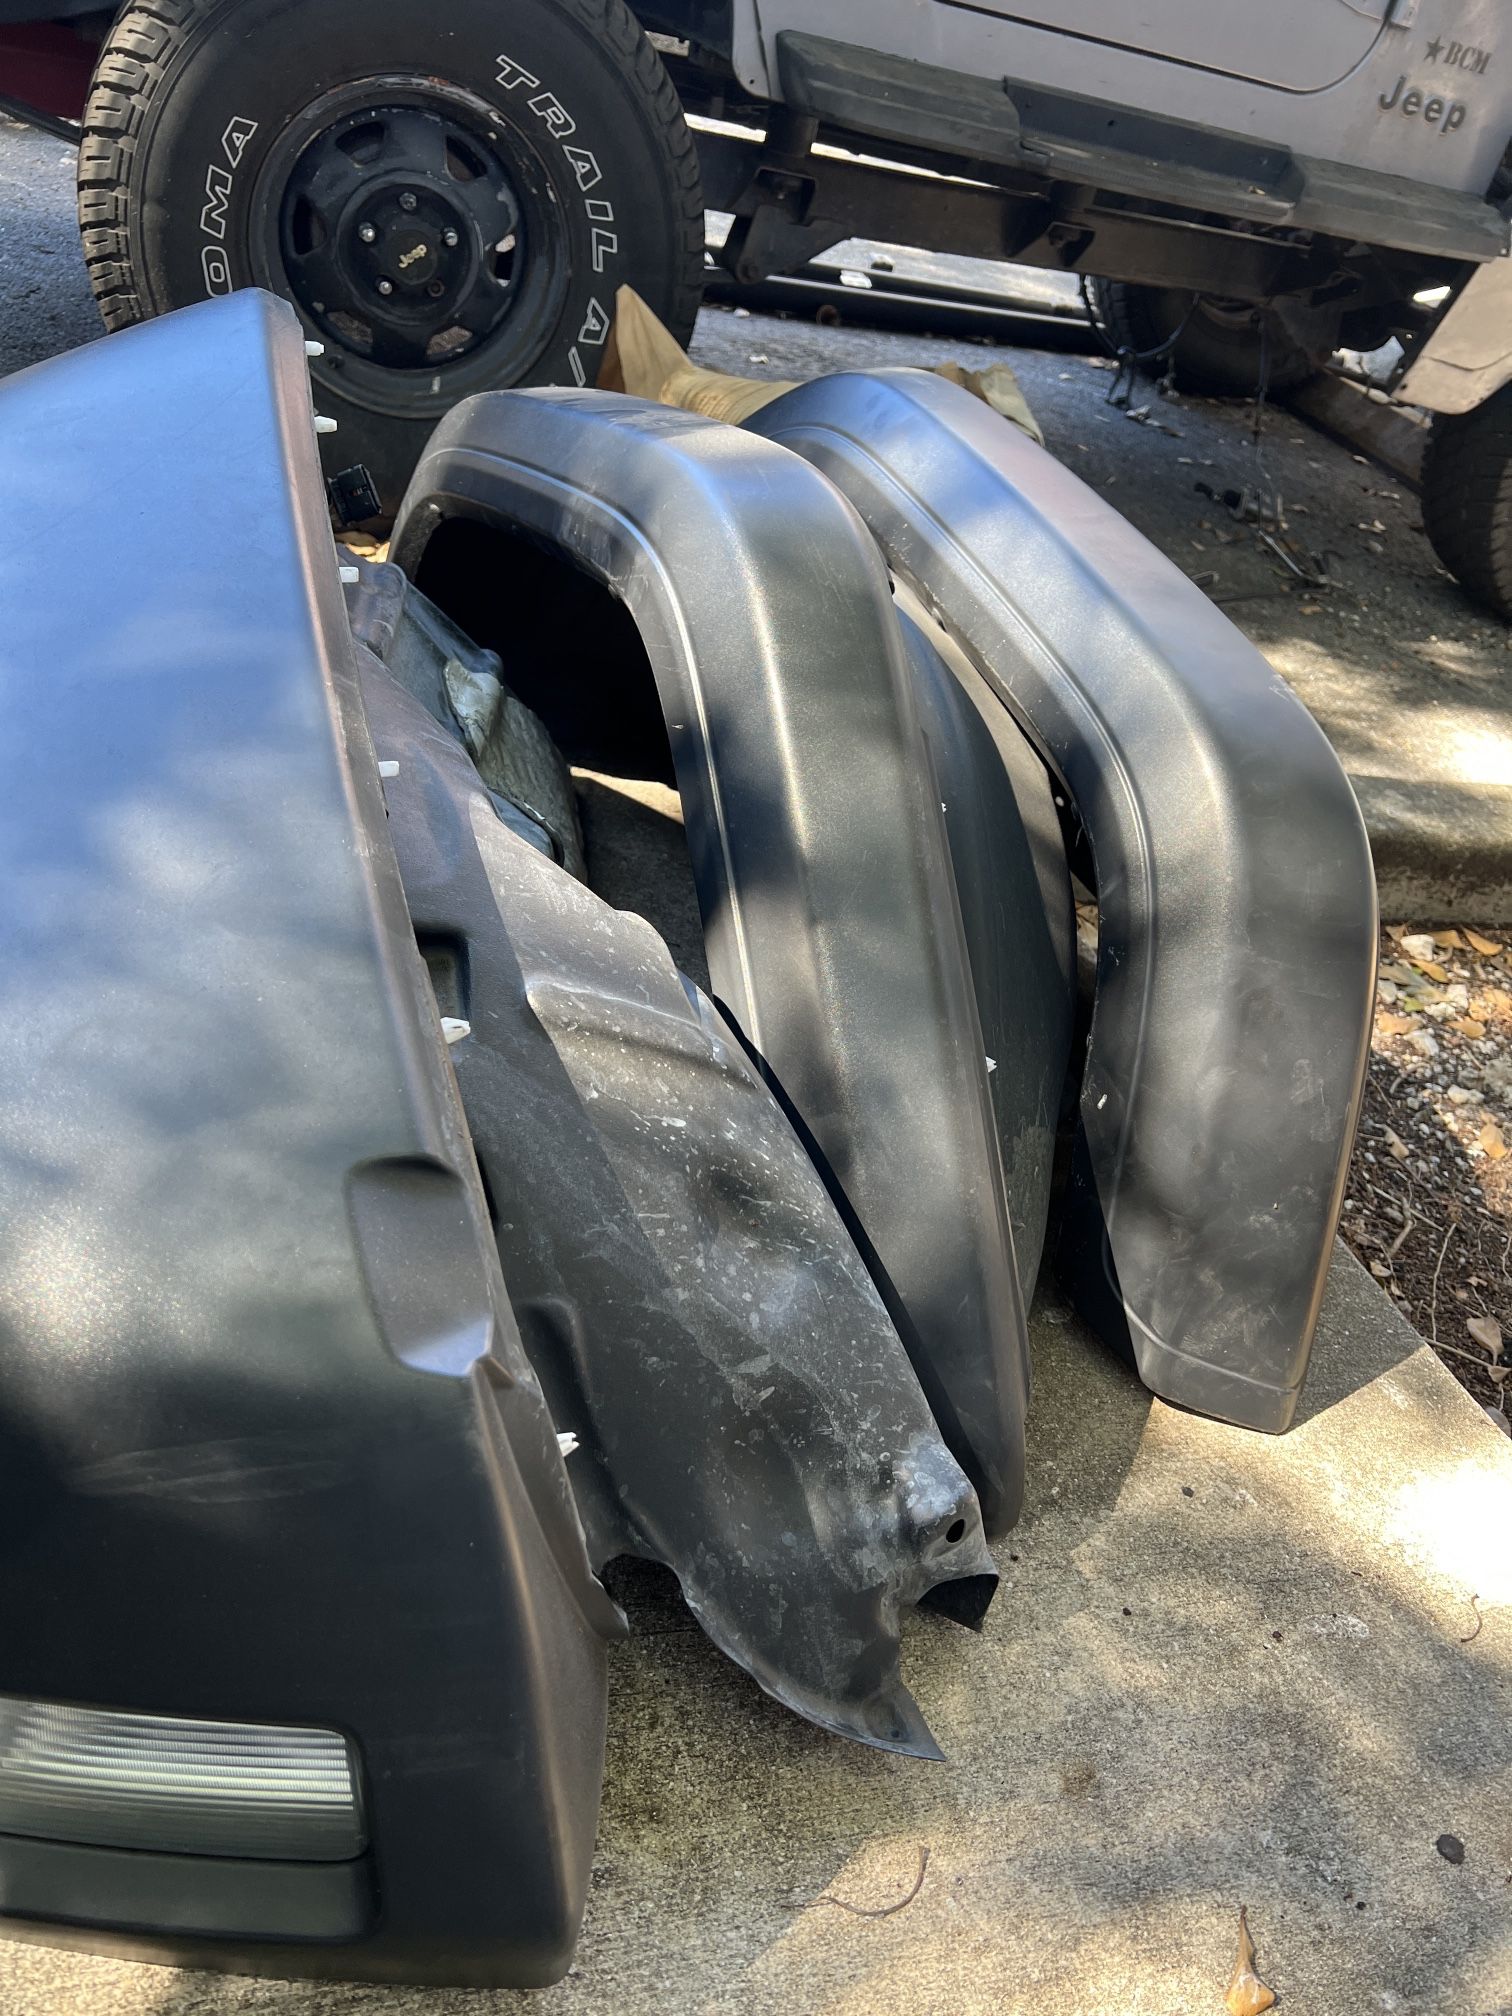 Jeep Wrangler Factory Fenders for Sale in Fort Lauderdale, FL - OfferUp